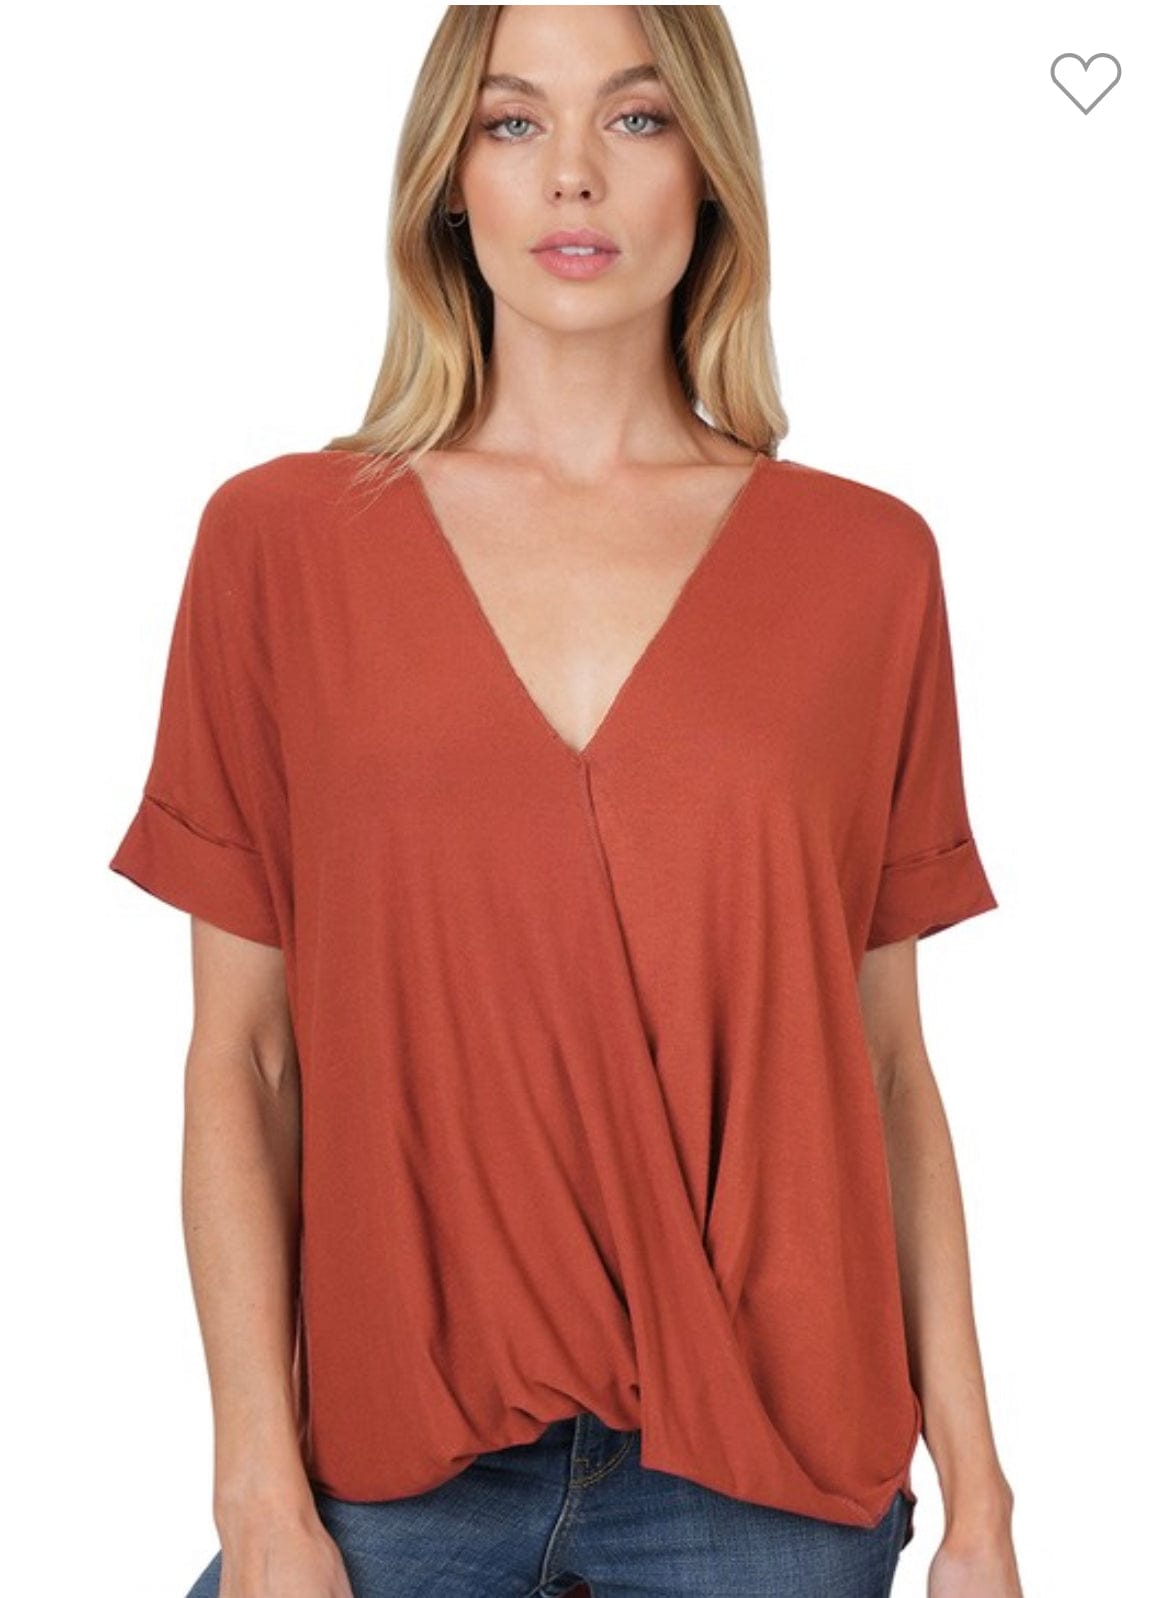 Draped front tops